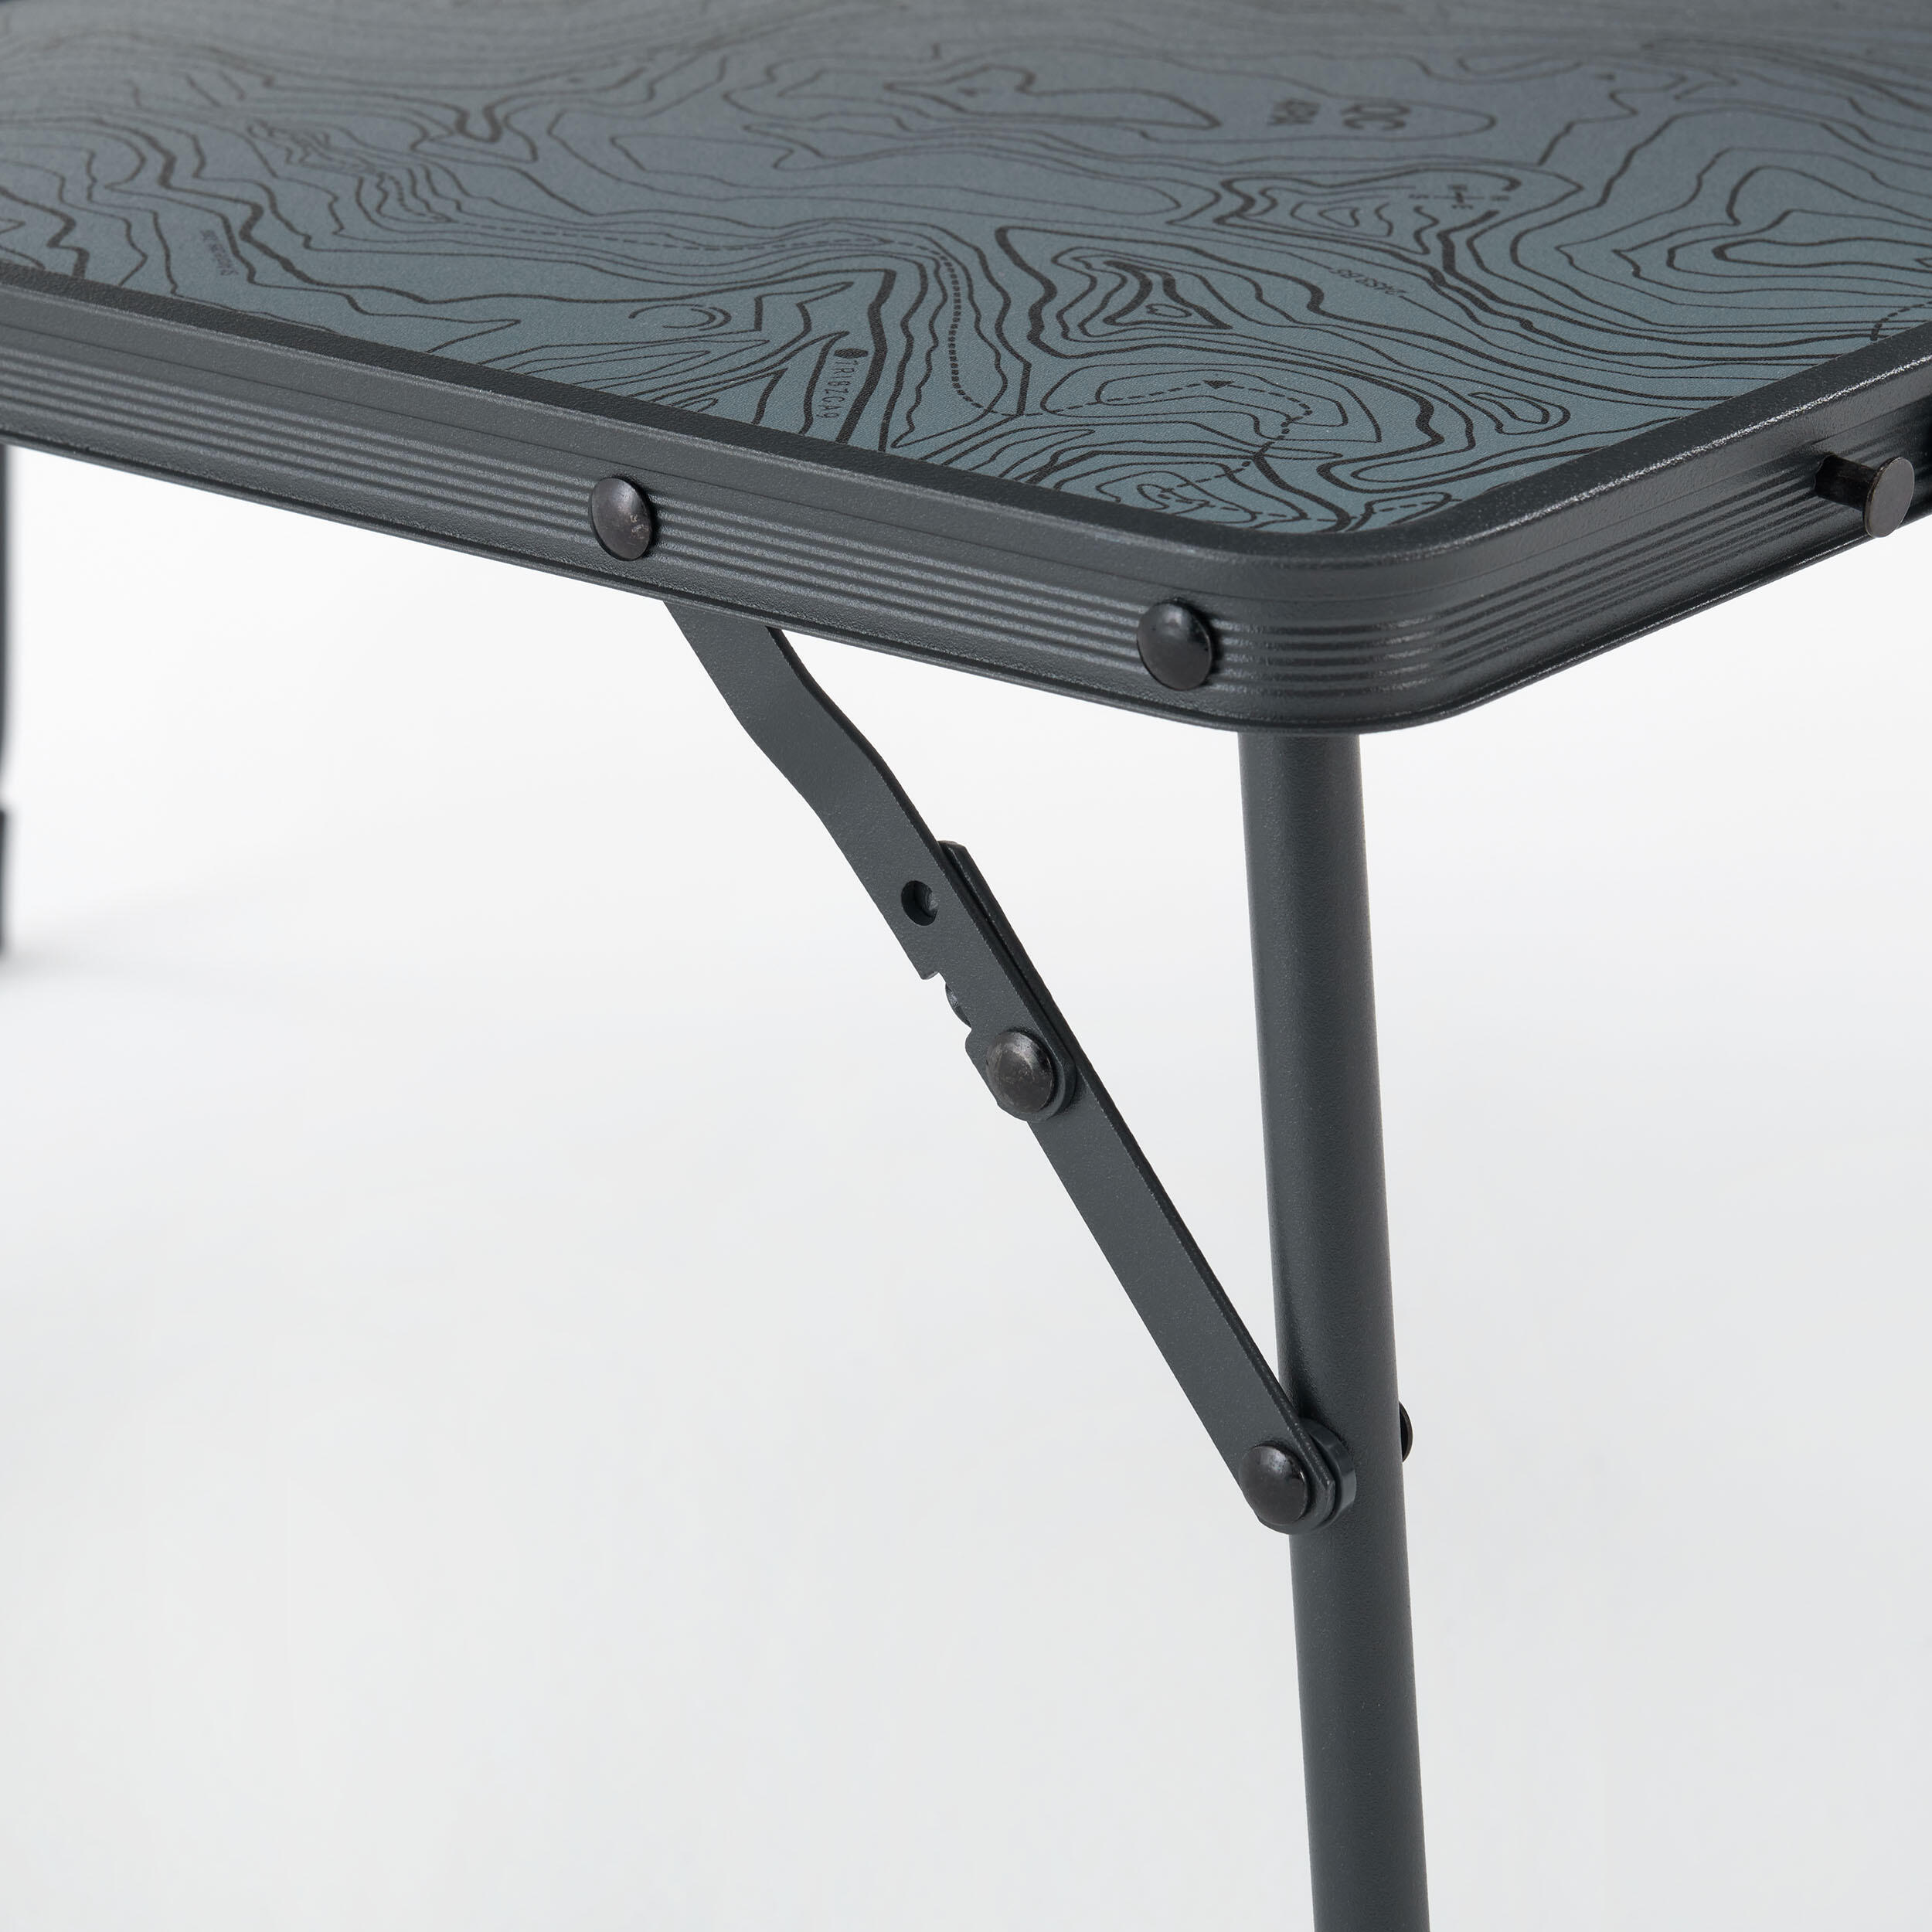 LOW FOLDING CAMPING TABLE - MH100 - GREY 5/10